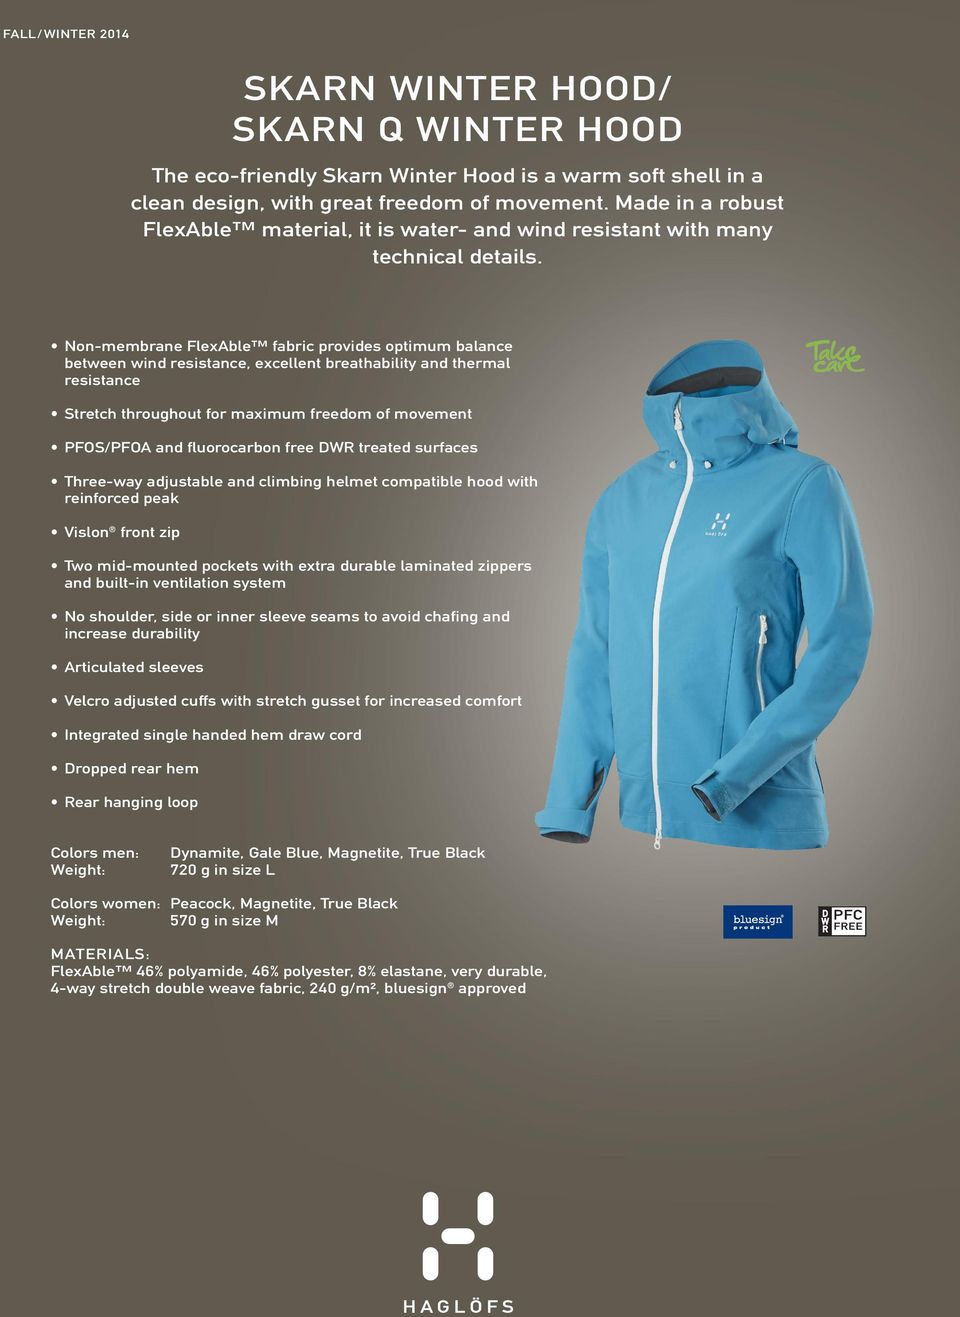 Non-membrane FlexAble fabric provides optimum balance between wind resistance, excellent breathability and thermal resistance Stretch throughout for maximum freedom of movement PFOS/PFOA and